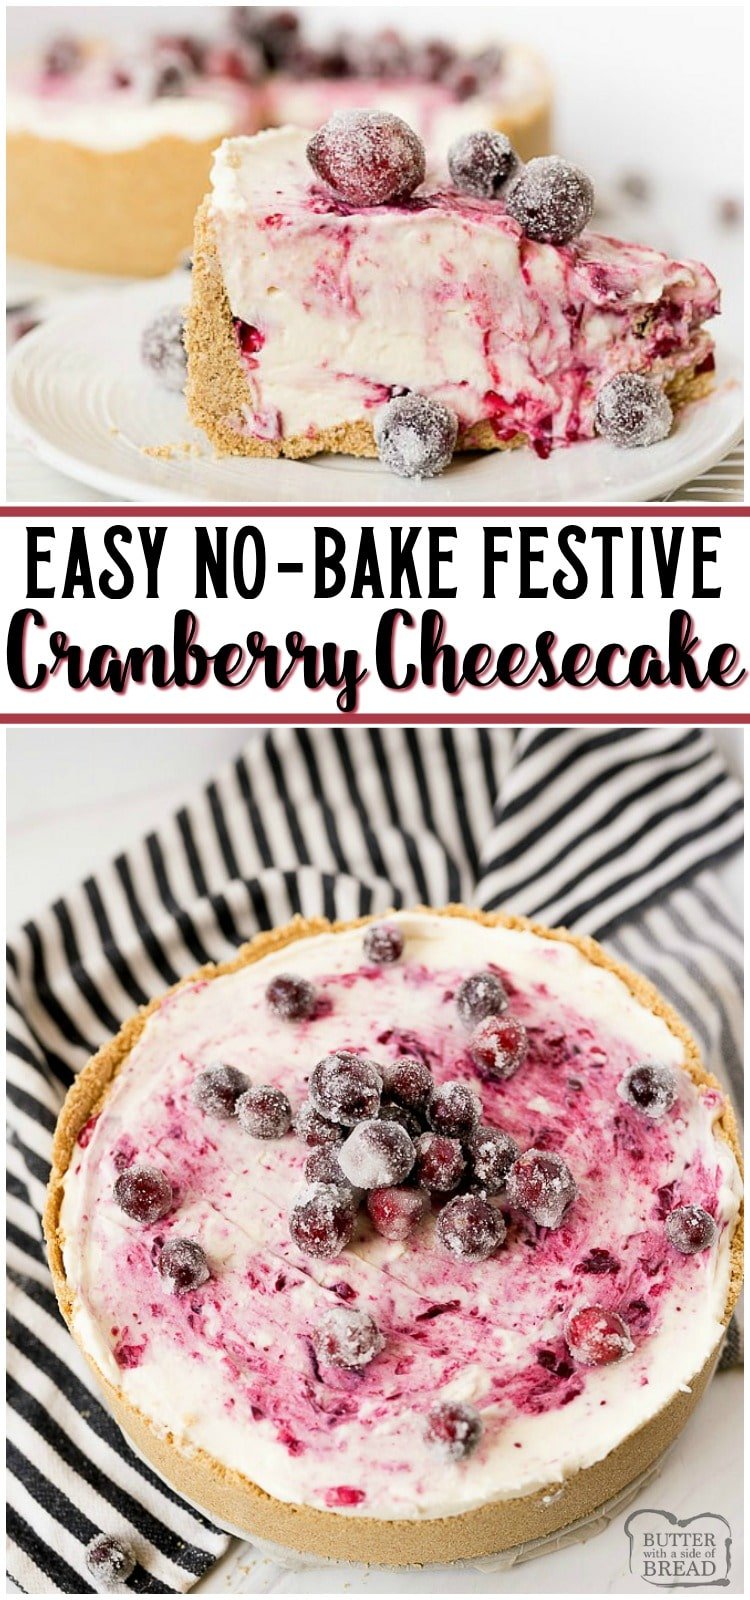 Cranberry Cheesecake Recipe has a fresh cranberry swirl and sugared cranberries as garnish! Easy 4-ingredient NO-BAKE cheesecake filling that's perfect for beginners. #cheesecake #cranberries #winter #holidays #christmas #dessert #nobake #recipe from BUTTER WITH A SIDE OF BREAD